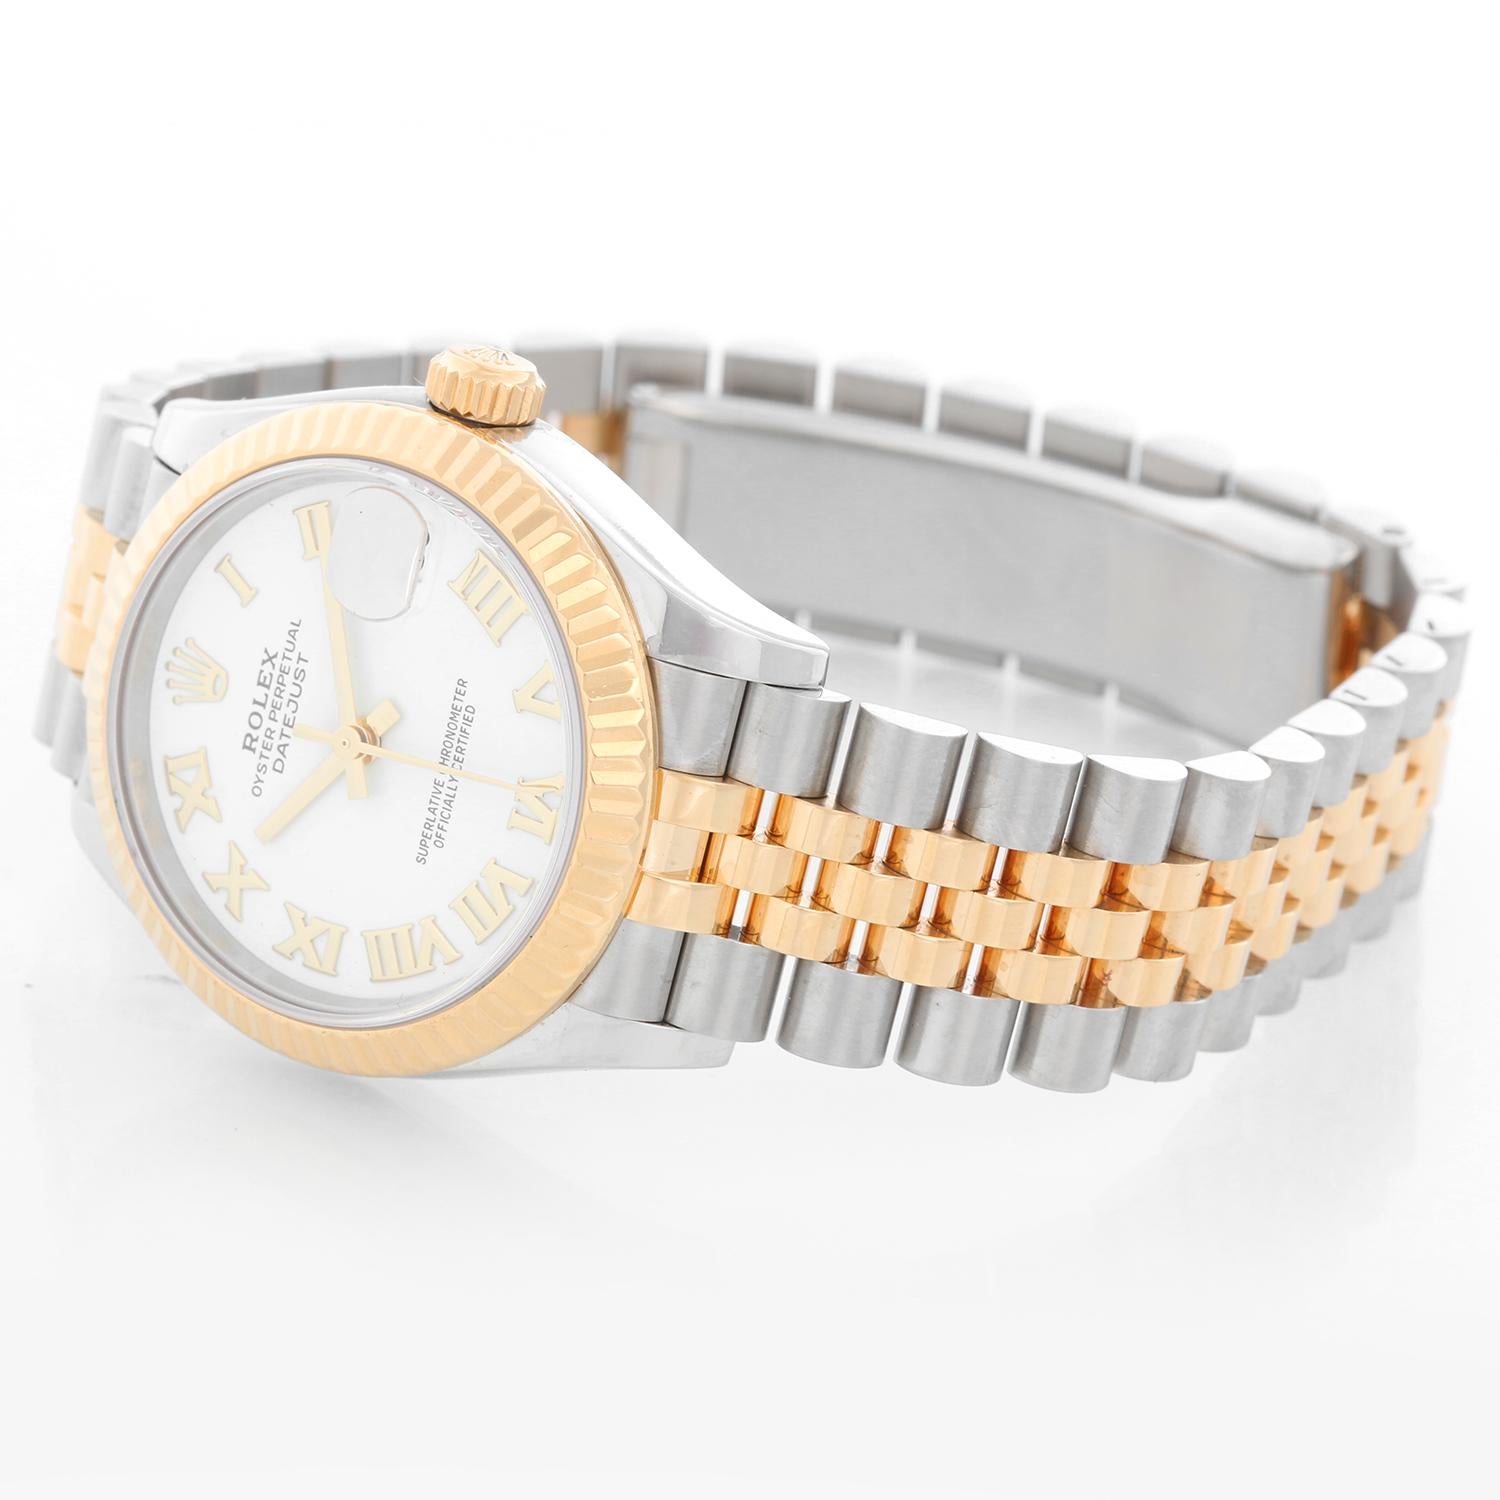 Rolex Datejust Midsize 2-Tone Watch 278273 - Automatic winding; 31 jewel; sapphire crystal. Stainless steel case with 18k yellow gold fluted bezel (31mm diameter). White dial with raised gold Roman numerals. Stainless steel hidden-clasp Jubilee